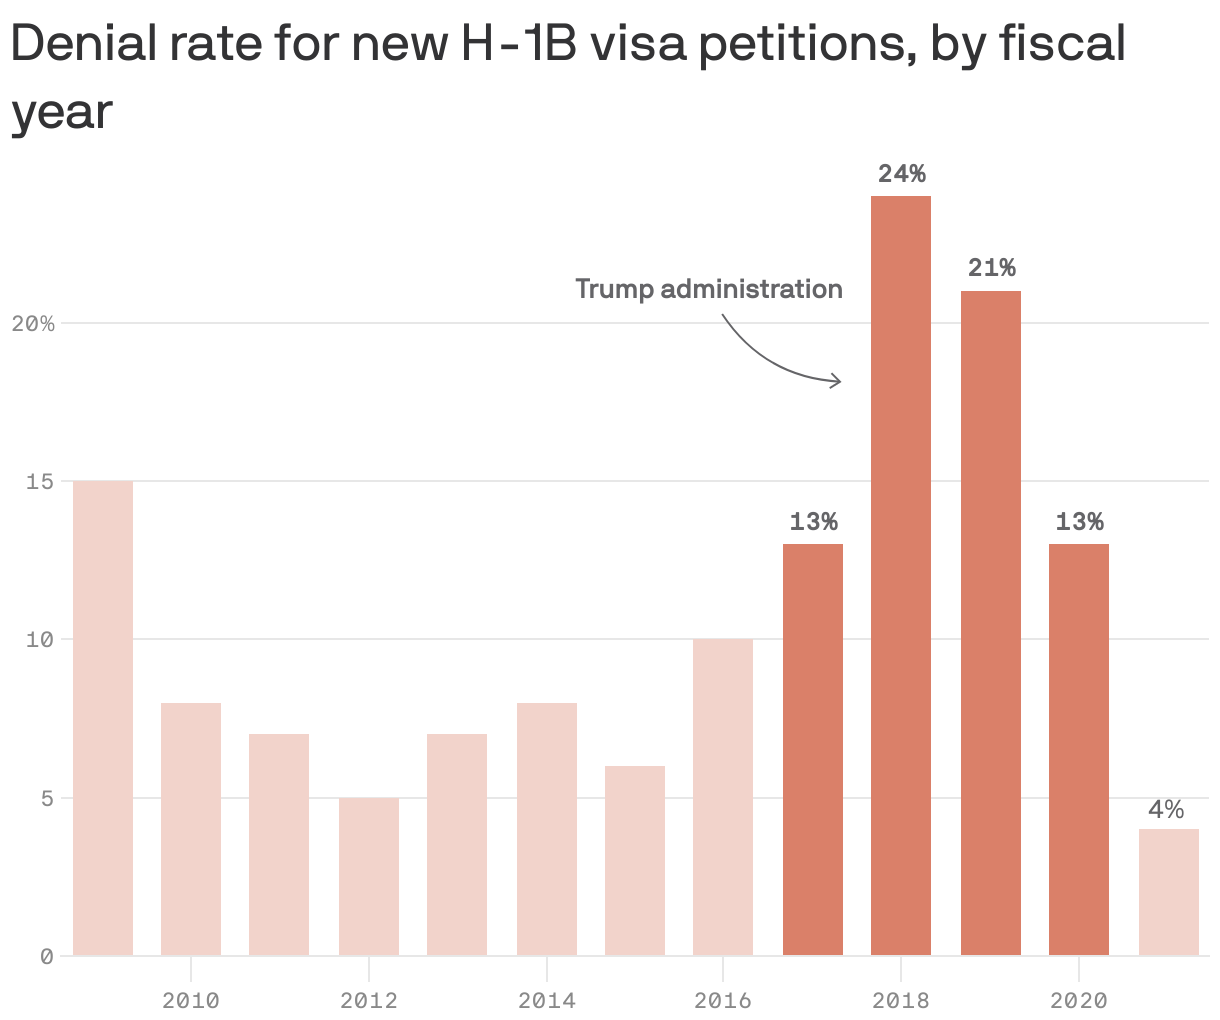 Denial rate for new H-1B visa petitions, by fiscal year